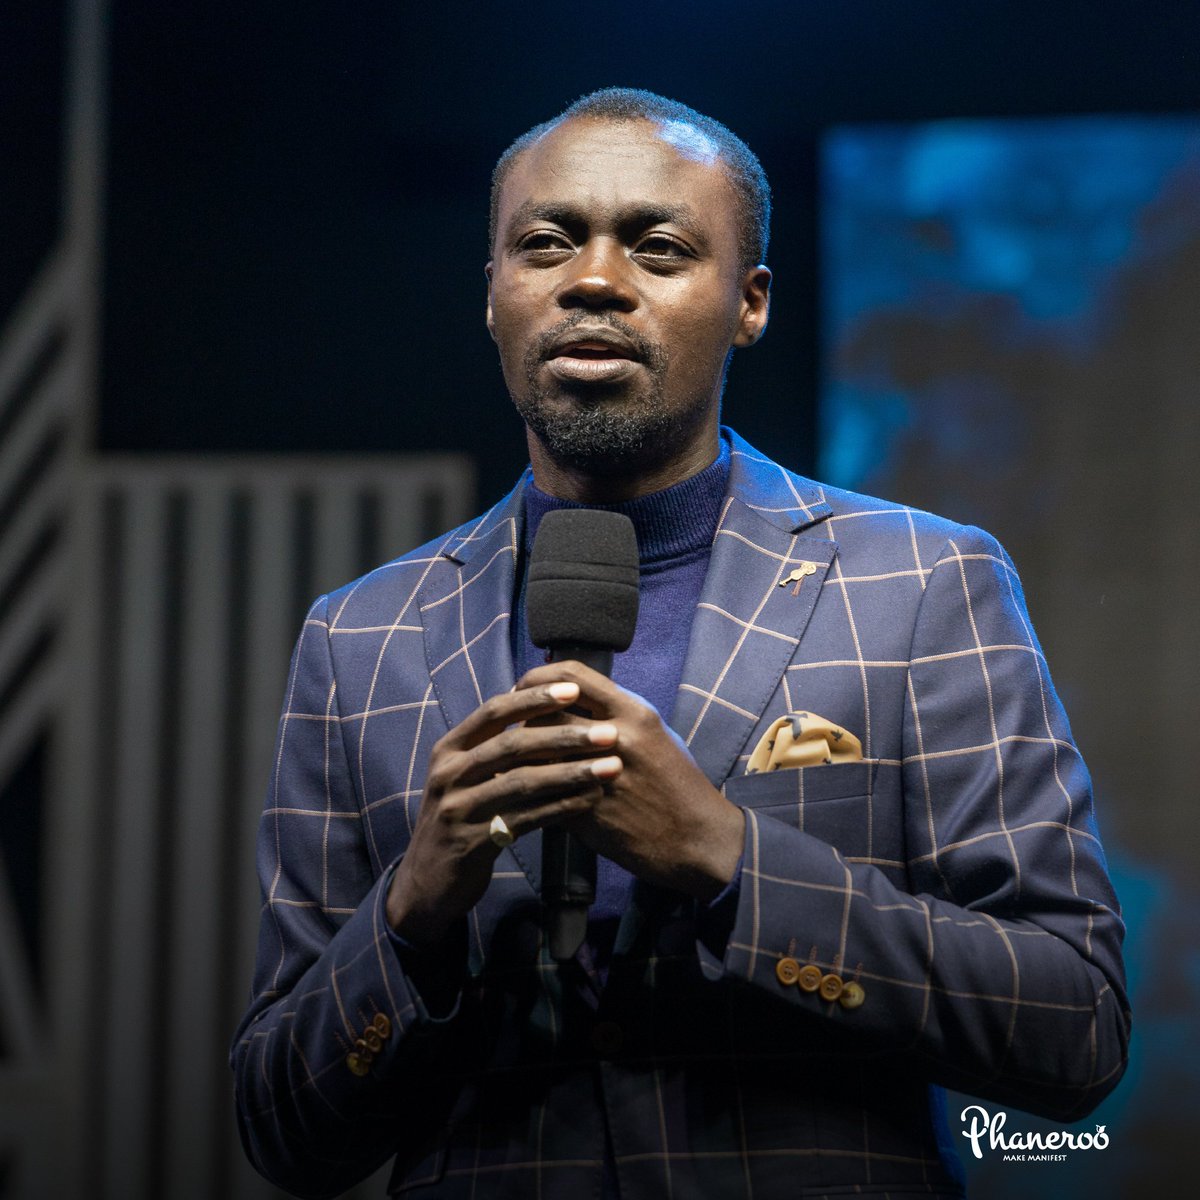 Purpose to master the art of listening to the voice of the Spirit of God. By this you will redeem time and and align yourself to your God-ordained destiny. Hallelujah! bit.ly/Phaneroo407 #PhanerooAtKololoGrounds #Phaneroo #LiveNow